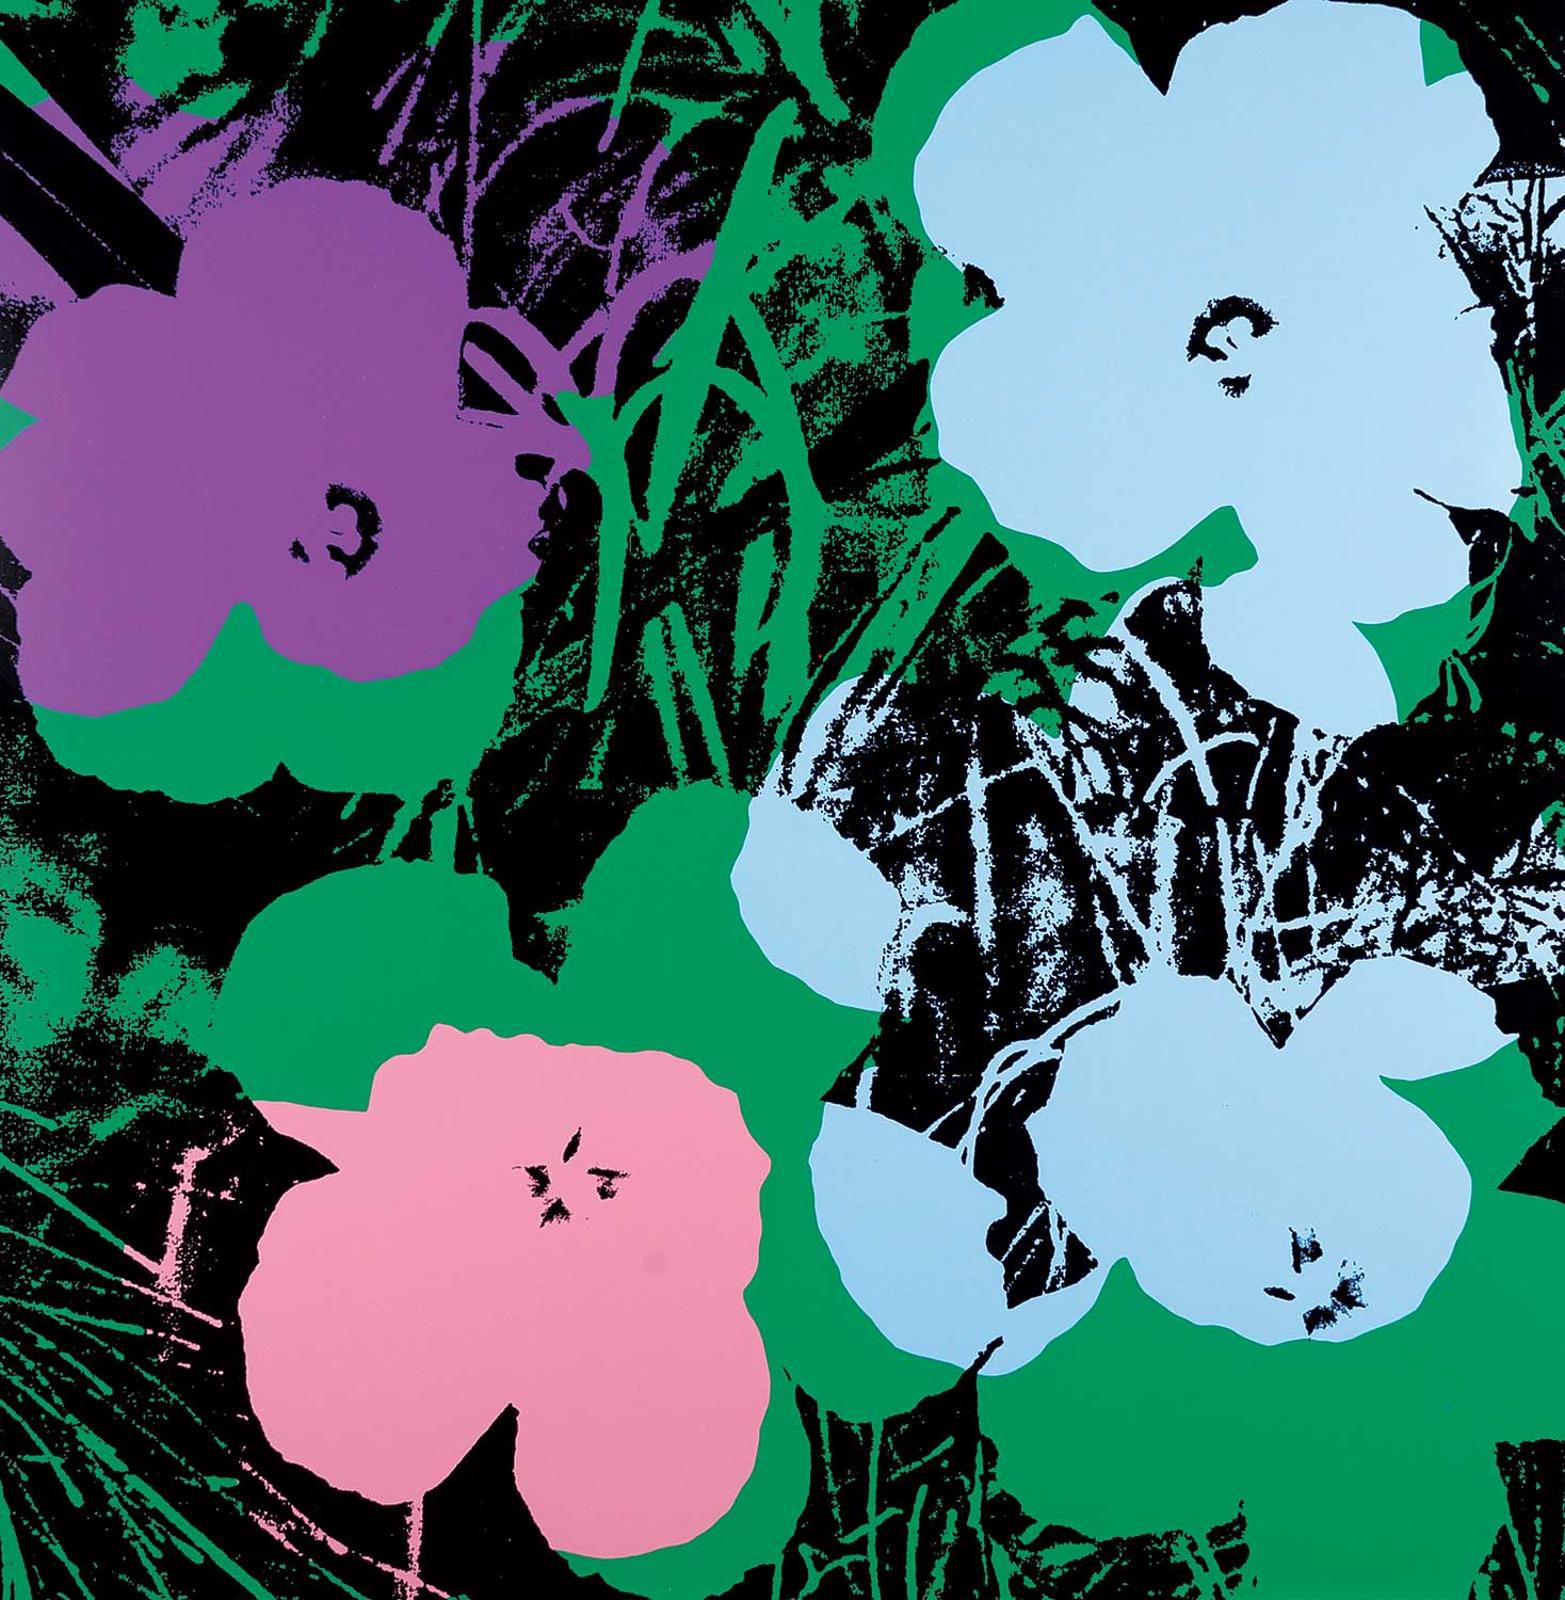 Andy Warhol (1928-1987) - Untitled - Flowers [Blue, Purple and Pink]